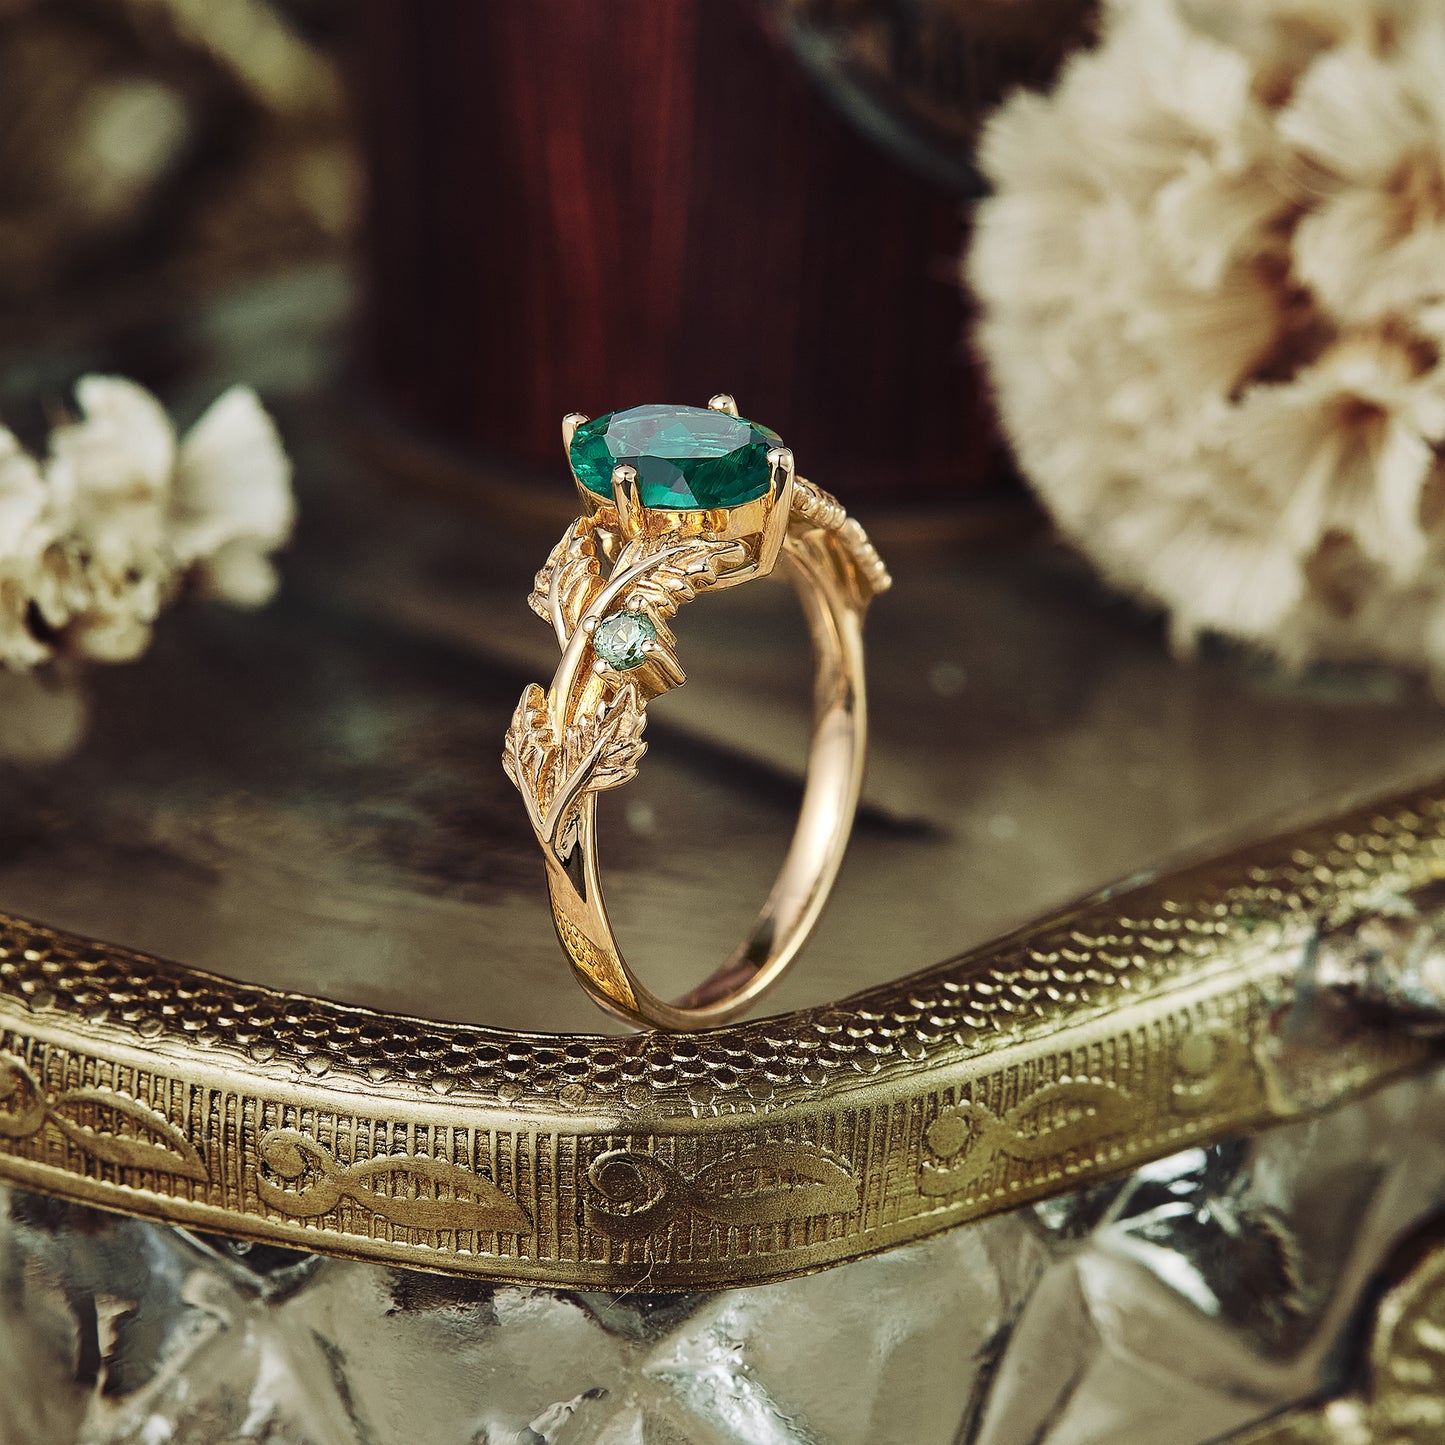 Lab emerald bezel ring from Provence : r/SyntheticGemstones